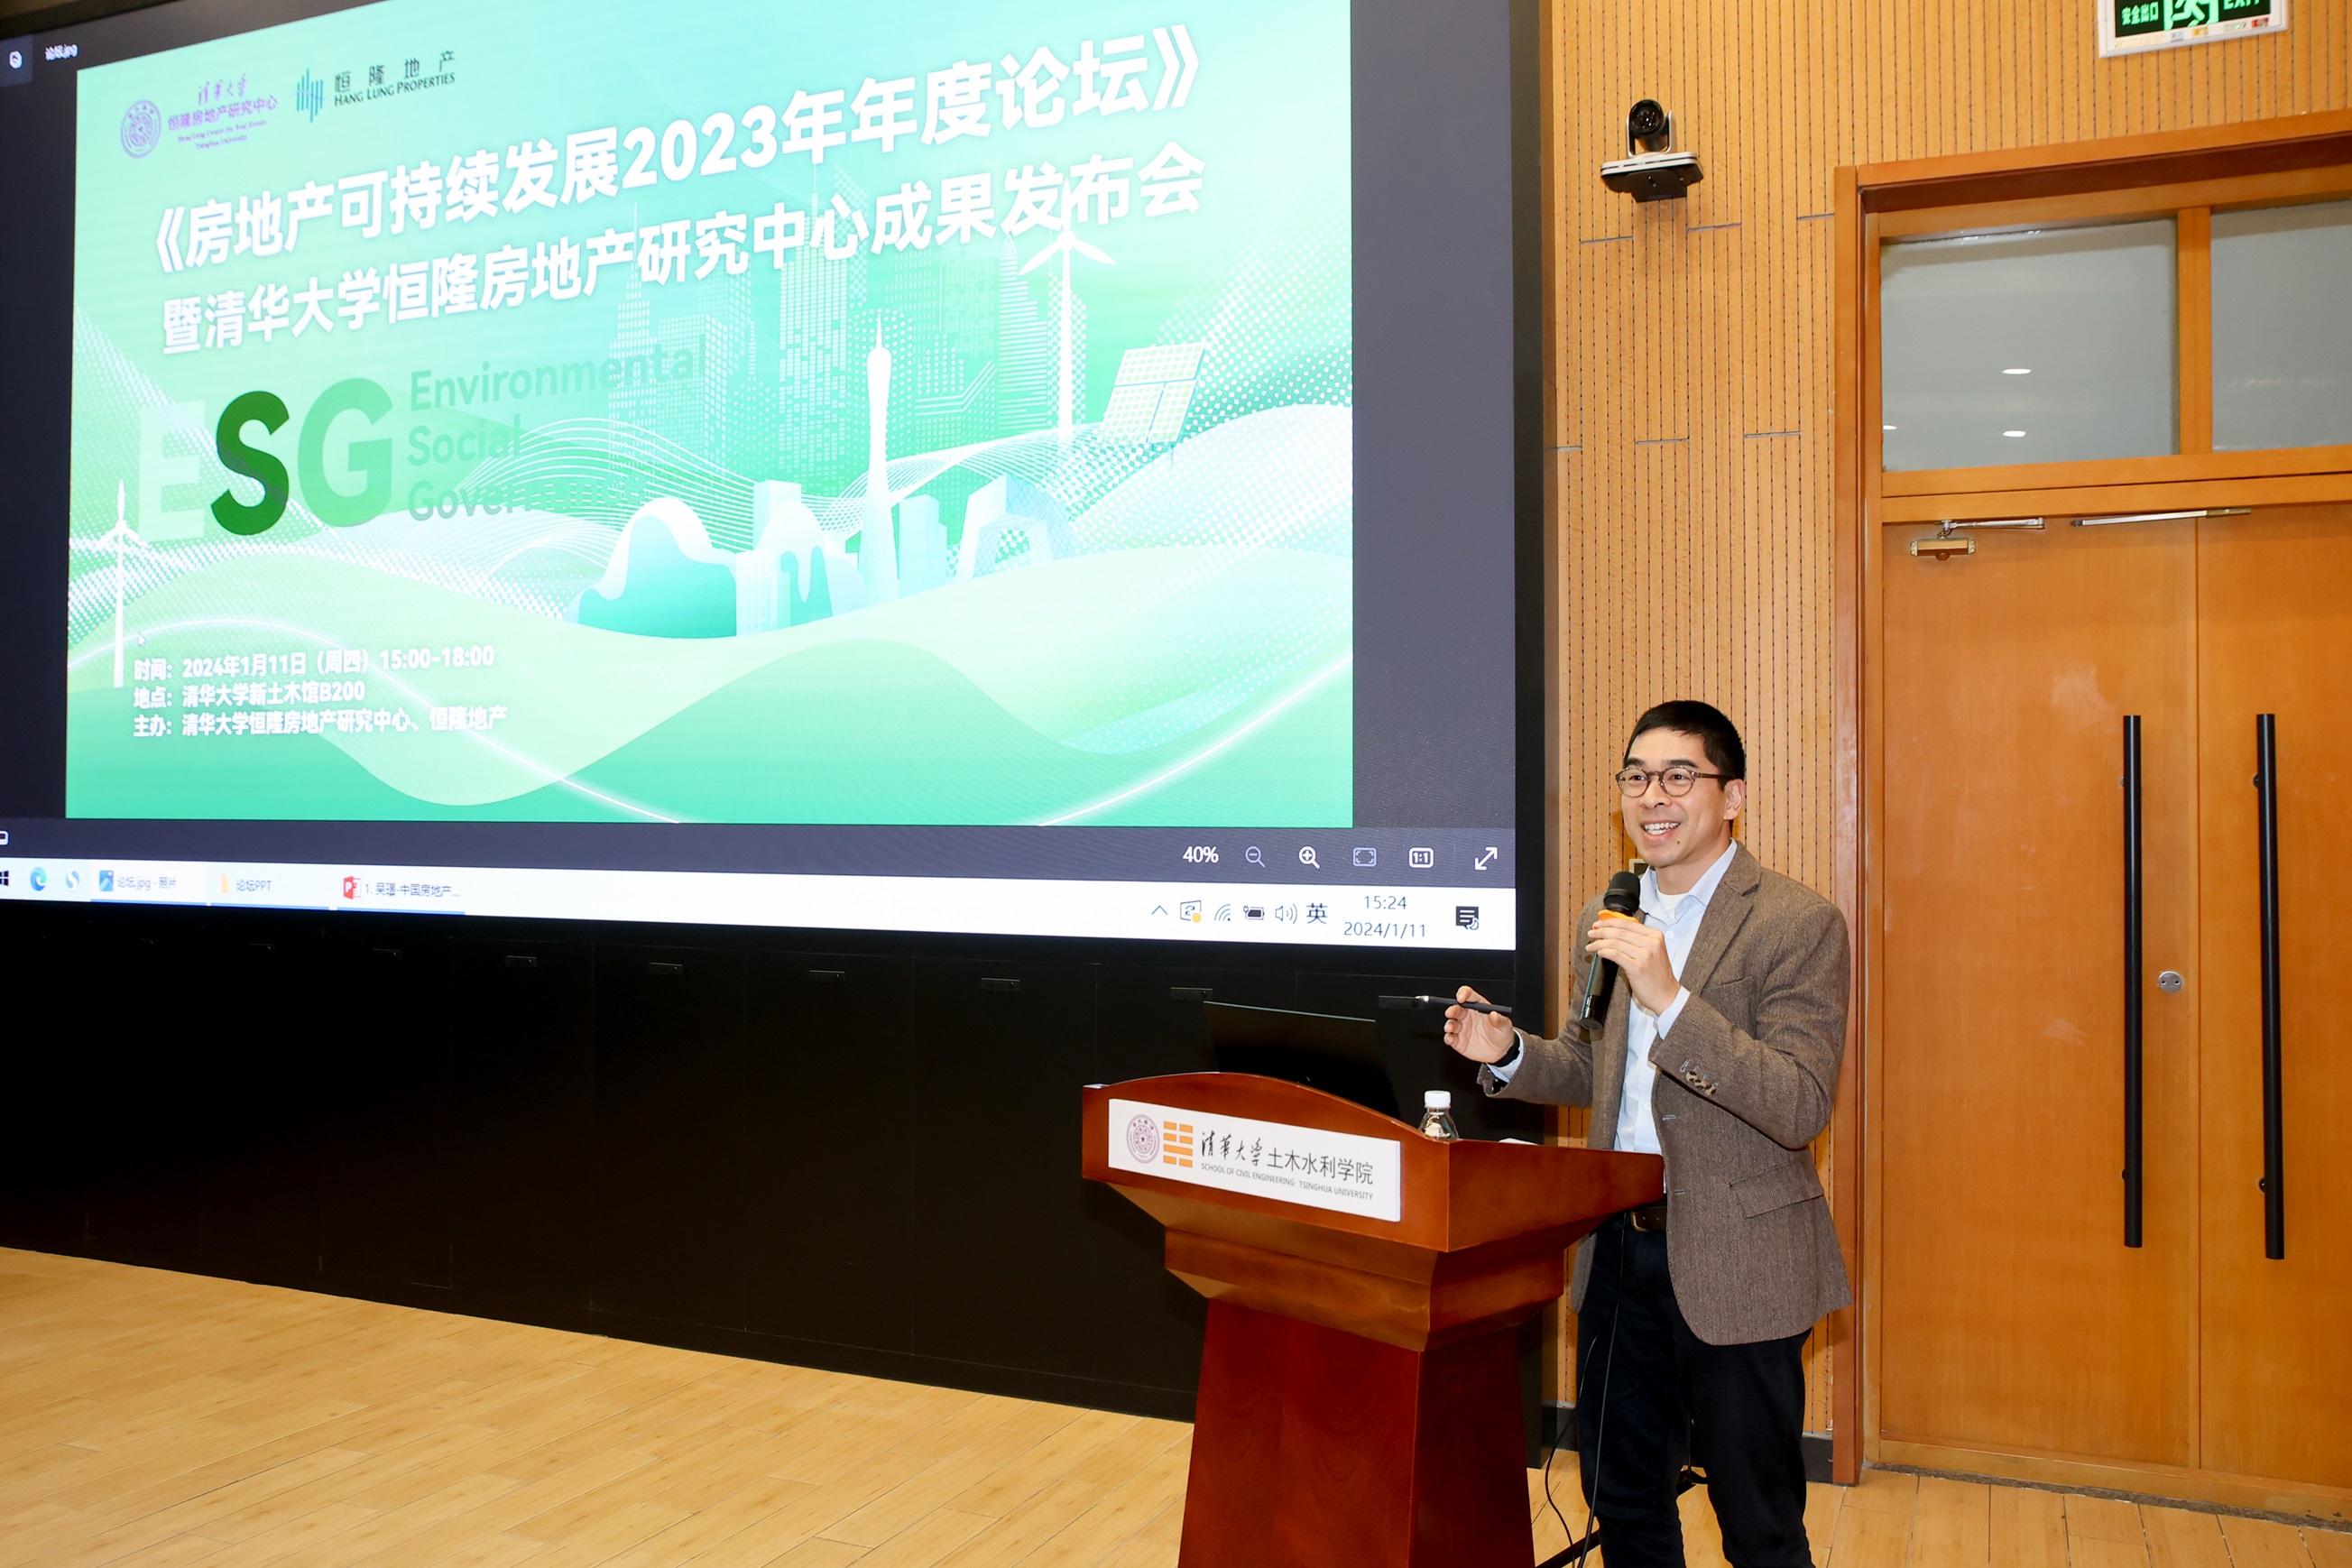 Mr. Adriel Chan, Vice Chair of Hang Lung Properties and Chair of the Sustainability Steering Committee, delivers an opening speech at the Sustainability in Real Estate Conference 2023 cum Annual Research Results Announcement